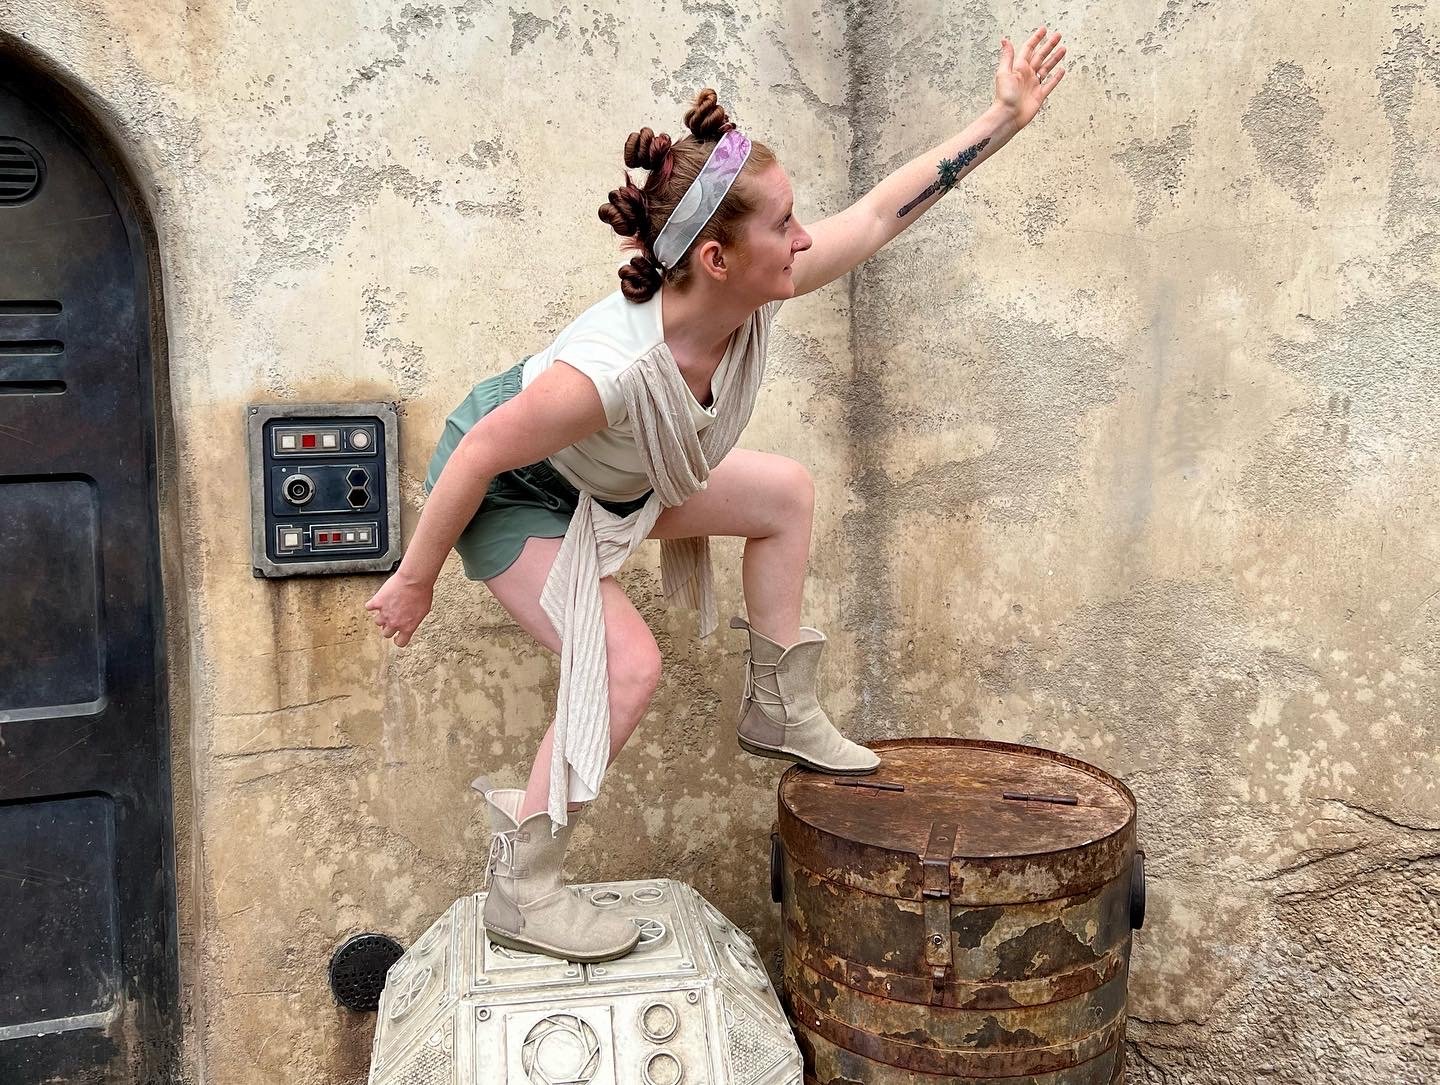 White women climbing containers in Star Wars: Galaxy's Edge